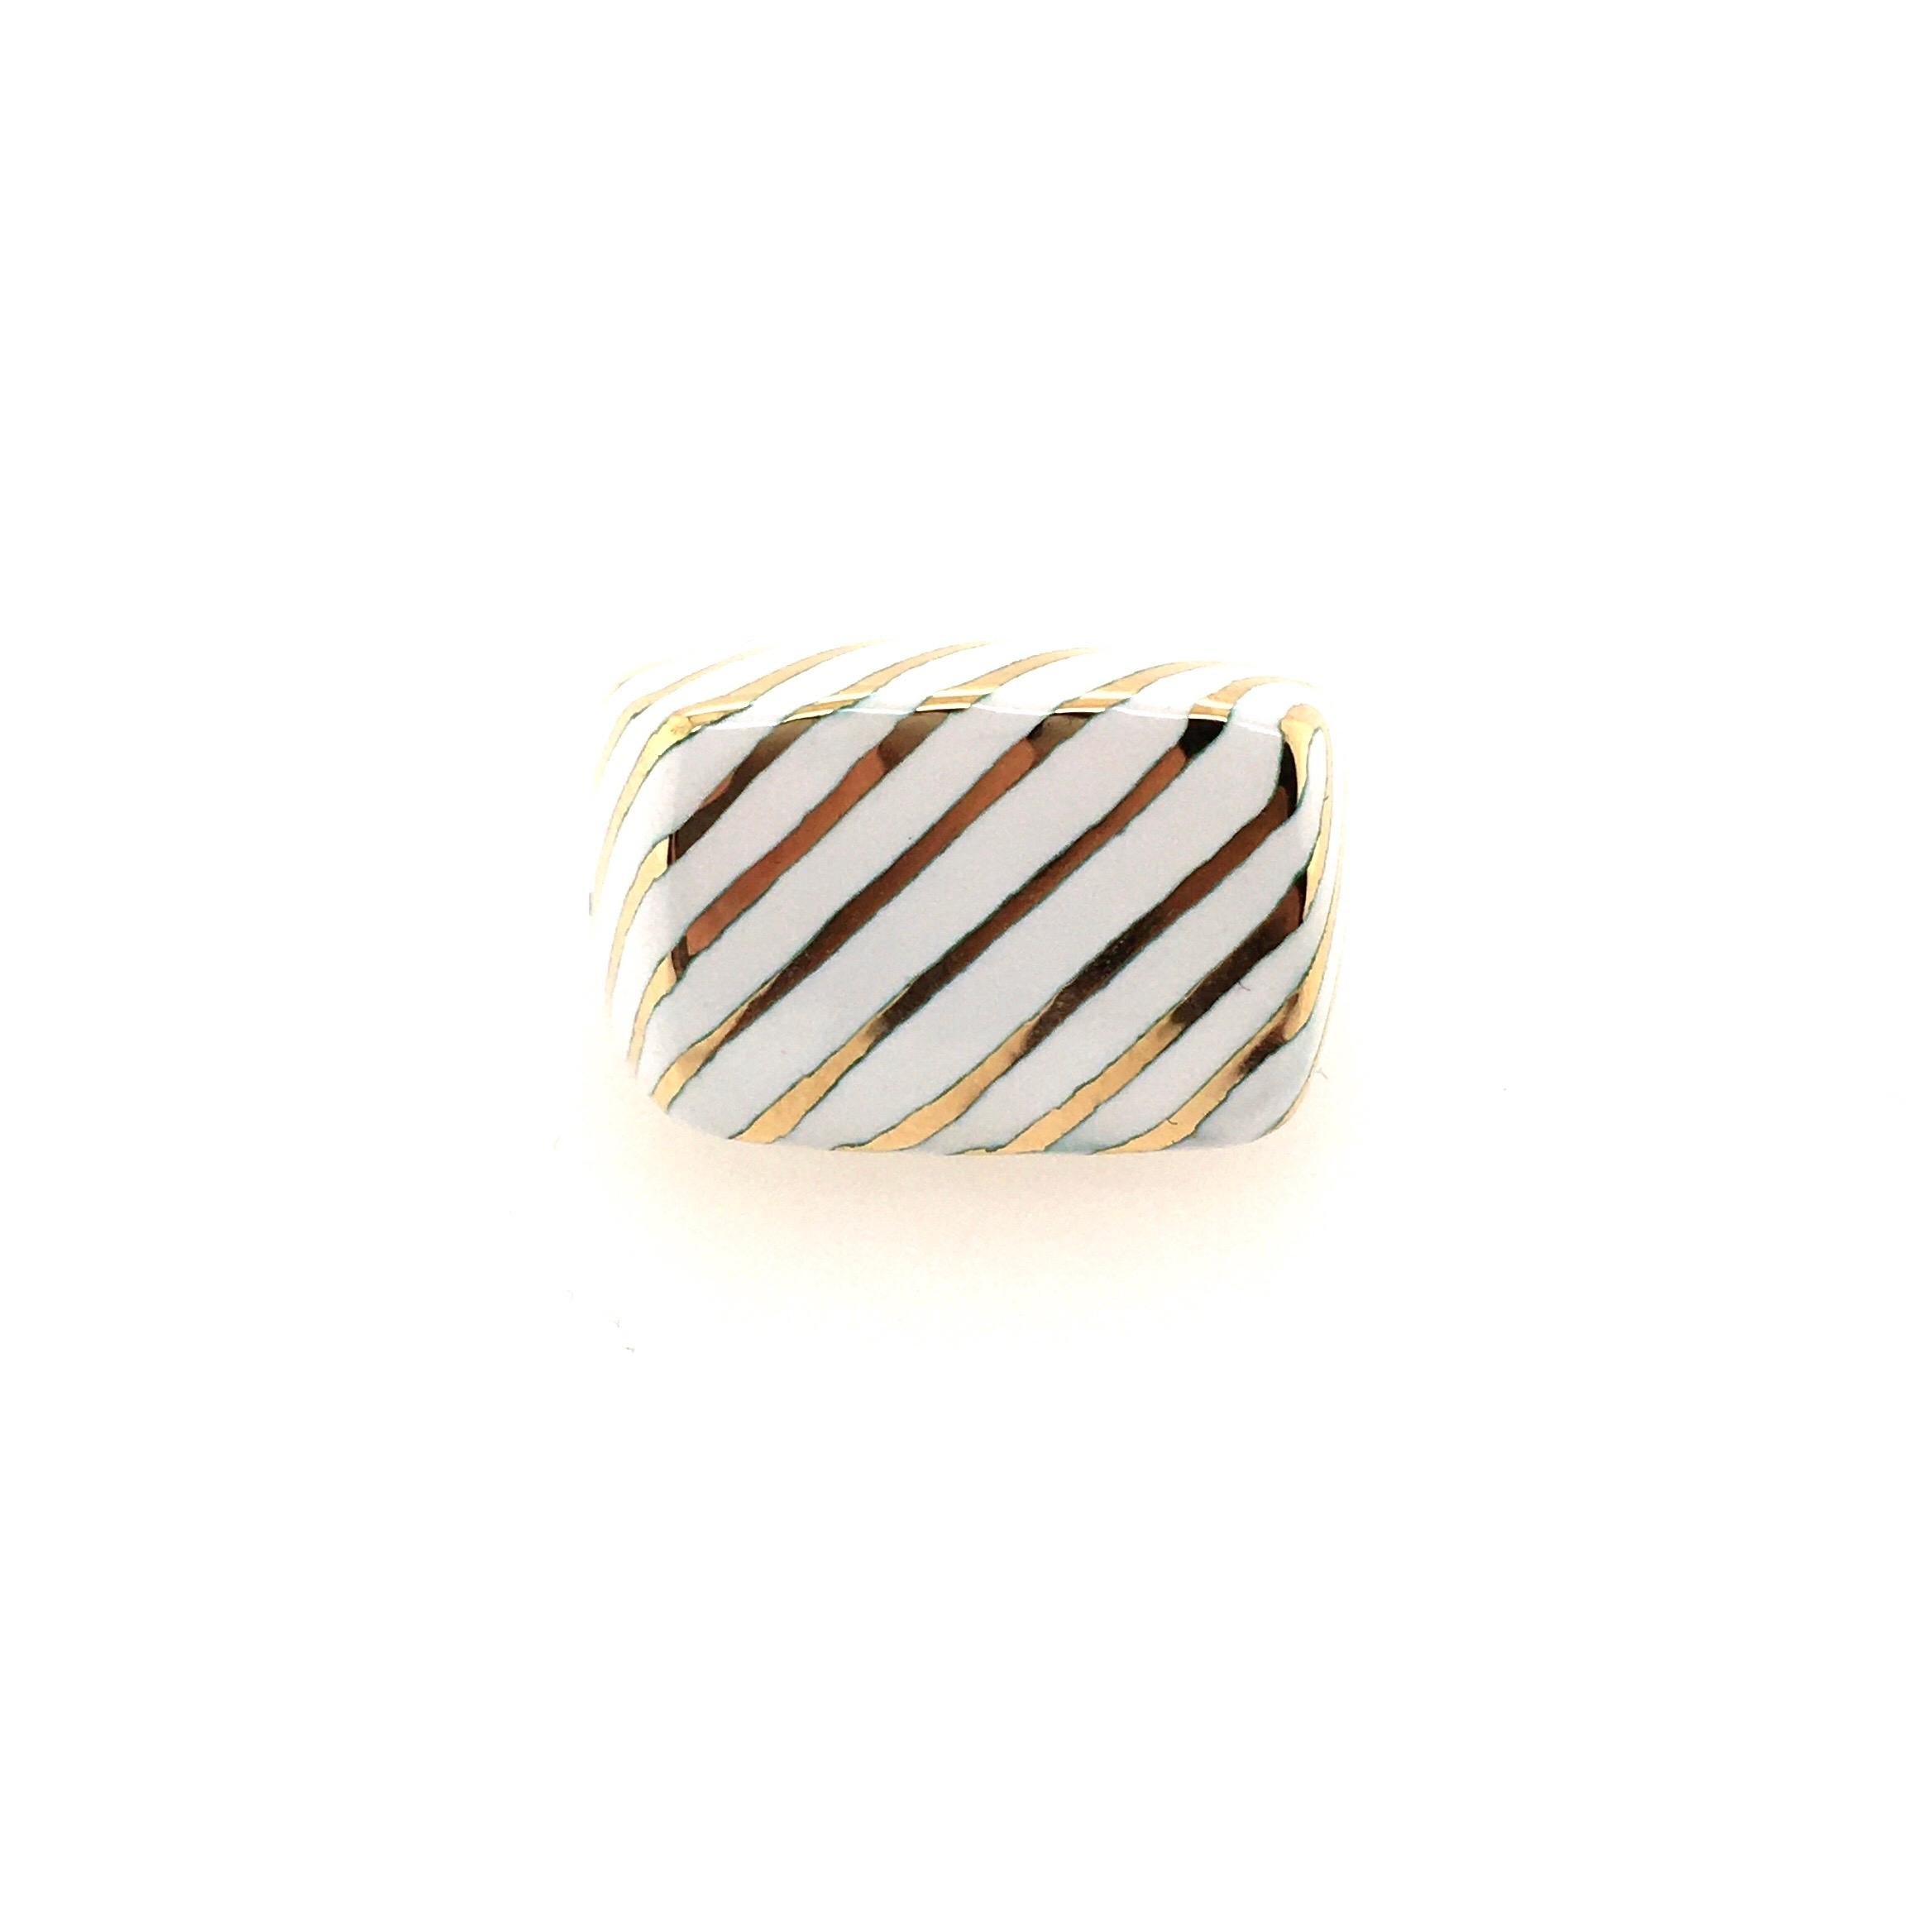 An 18 karat yellow gold and enamel ring. David Webb. Of squared design, decorated with stripped white enamel. Size 6 1/2 (with sizer), gross weight is approximately 22.2 grams. Stamped Webb. 